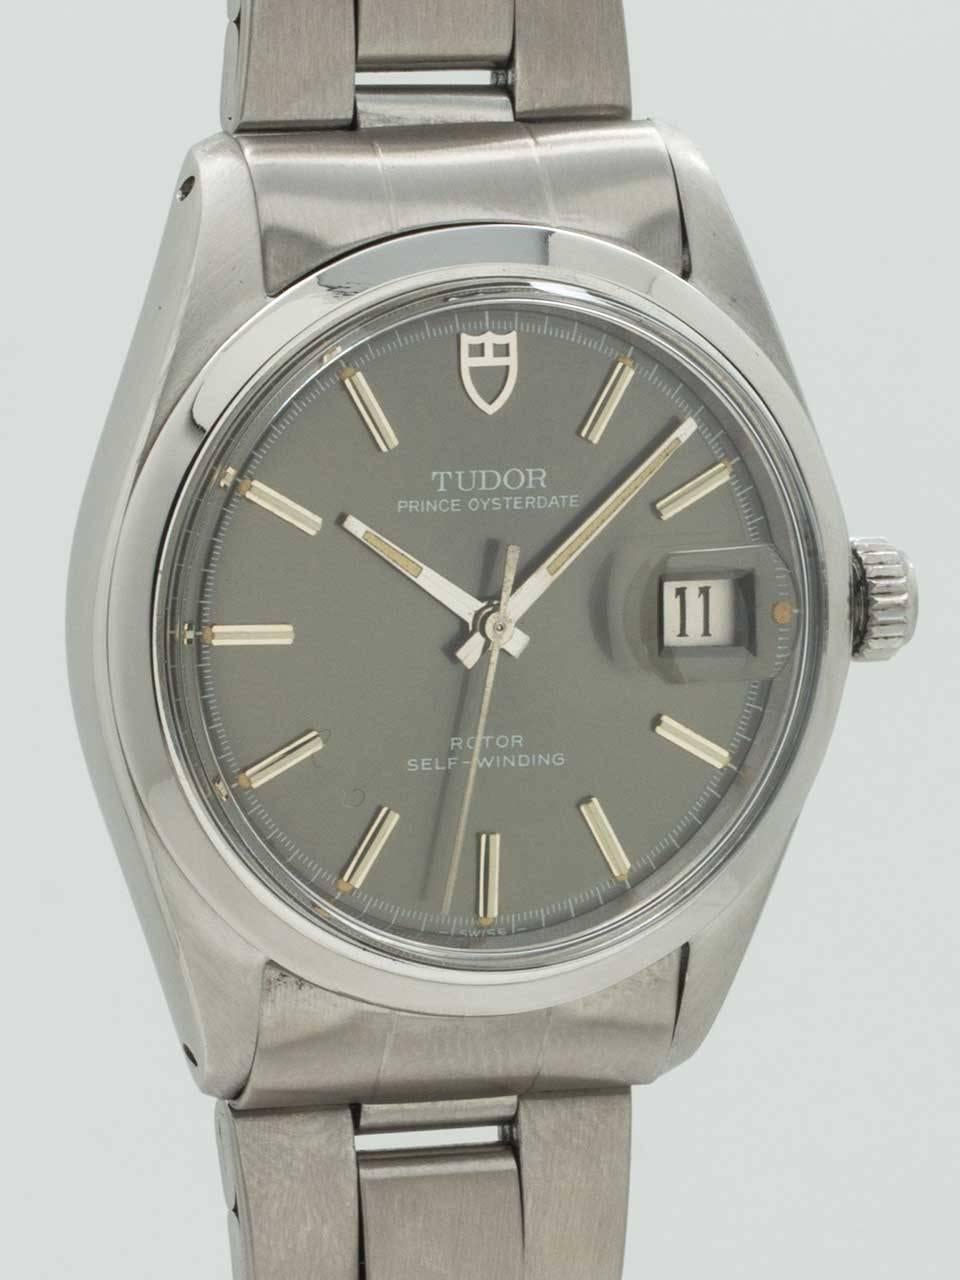 Tudor Prince Oyster Date Wristwatch ref 70500 circa 1970’s. 34mm diameter case with smooth bezel and acrylic crystal. Original gray dial with applied silver indexes and silver baton hands. With original unrestored luminous dots. Powered by self